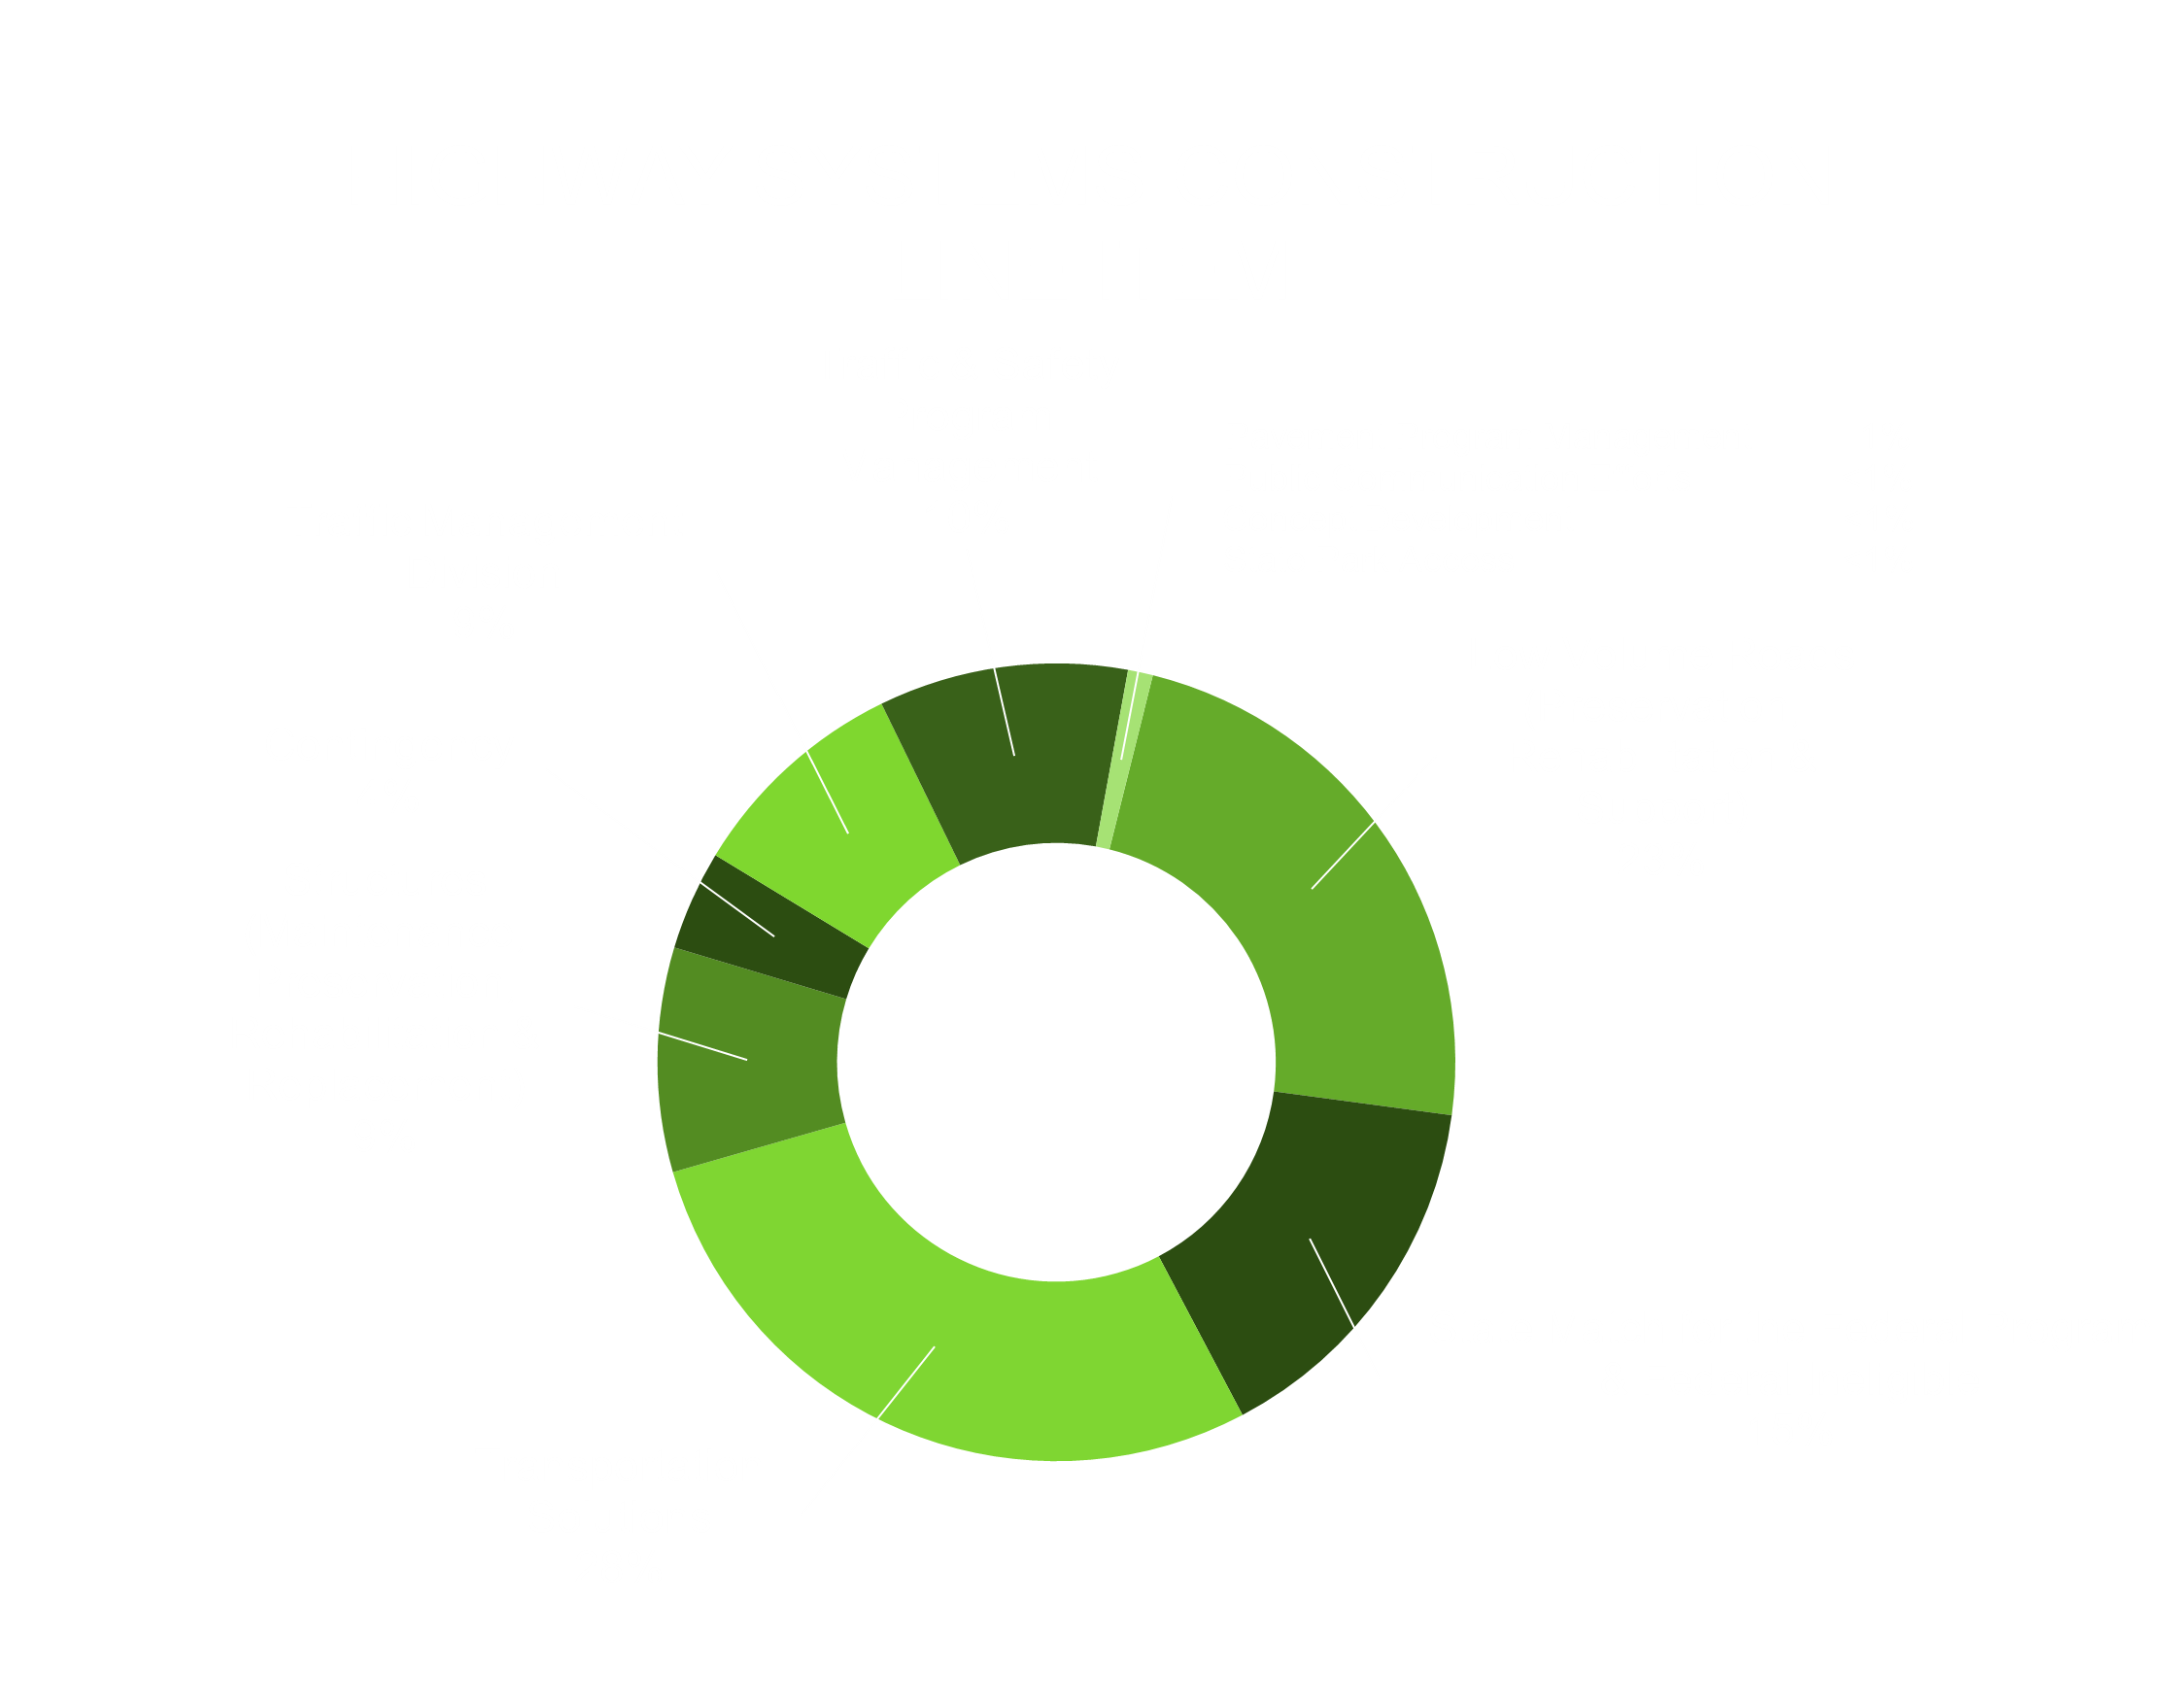 Construction Management Line Item chart shows Low Volume Roads 23%, State Match for the Federal Program and Federal Ineligible 15%, Transporation Solutions 28%, Structures 9%, Contingency 4%, Traffic Management Division 9%, Traffic & Safety Program Management 10%, and Other less than 3%.